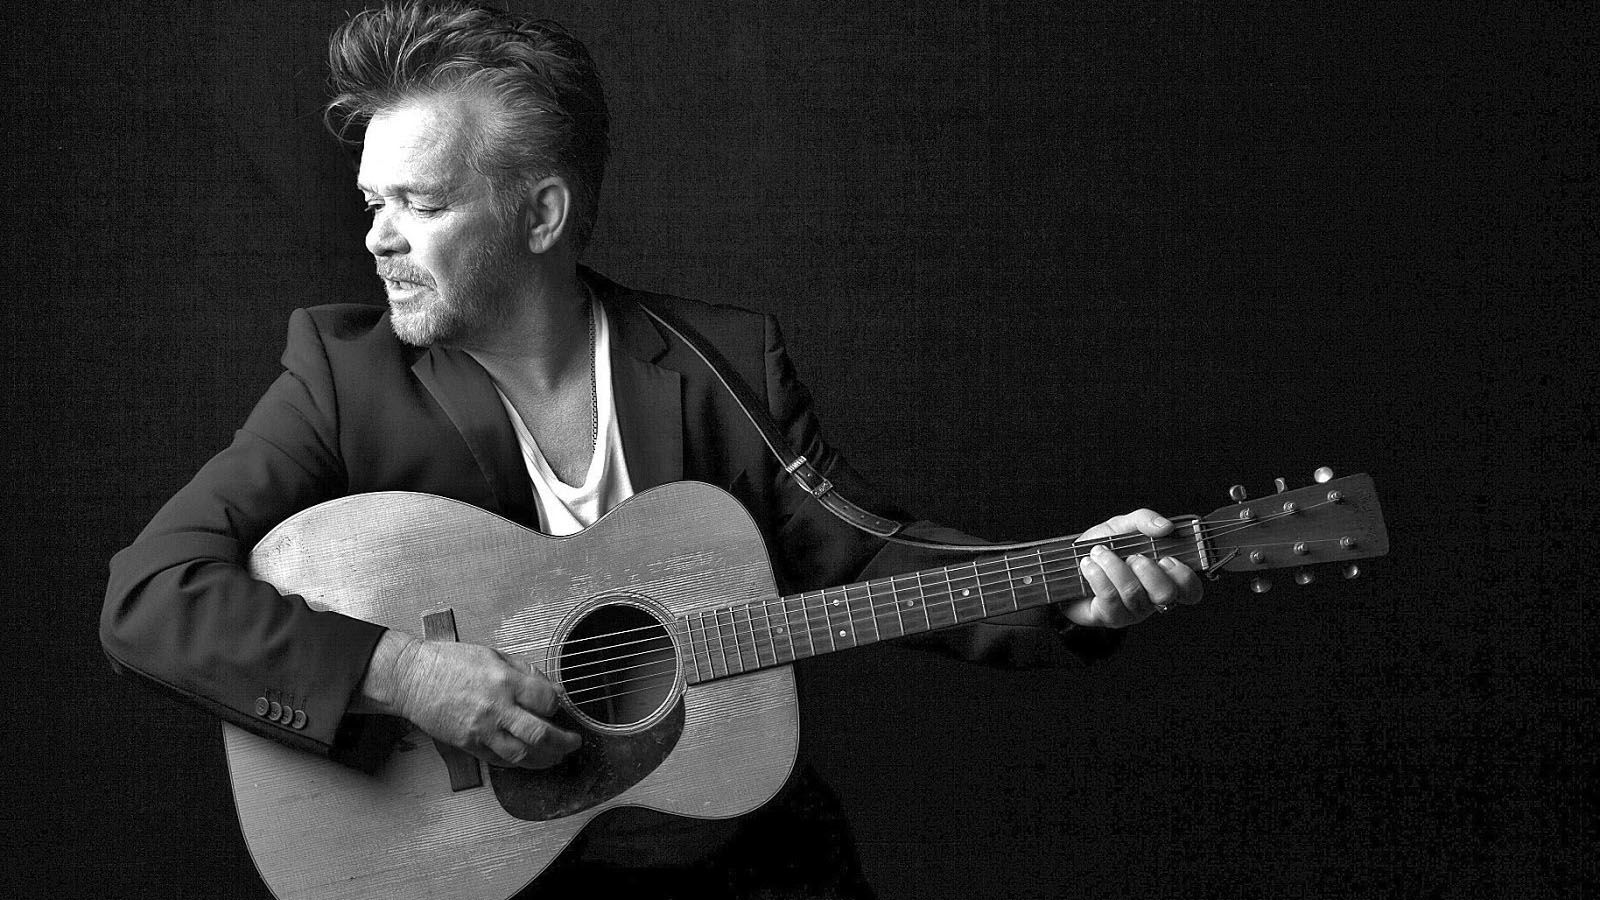 John Mellencamp will be at Embassy Theatre for two nights in May.